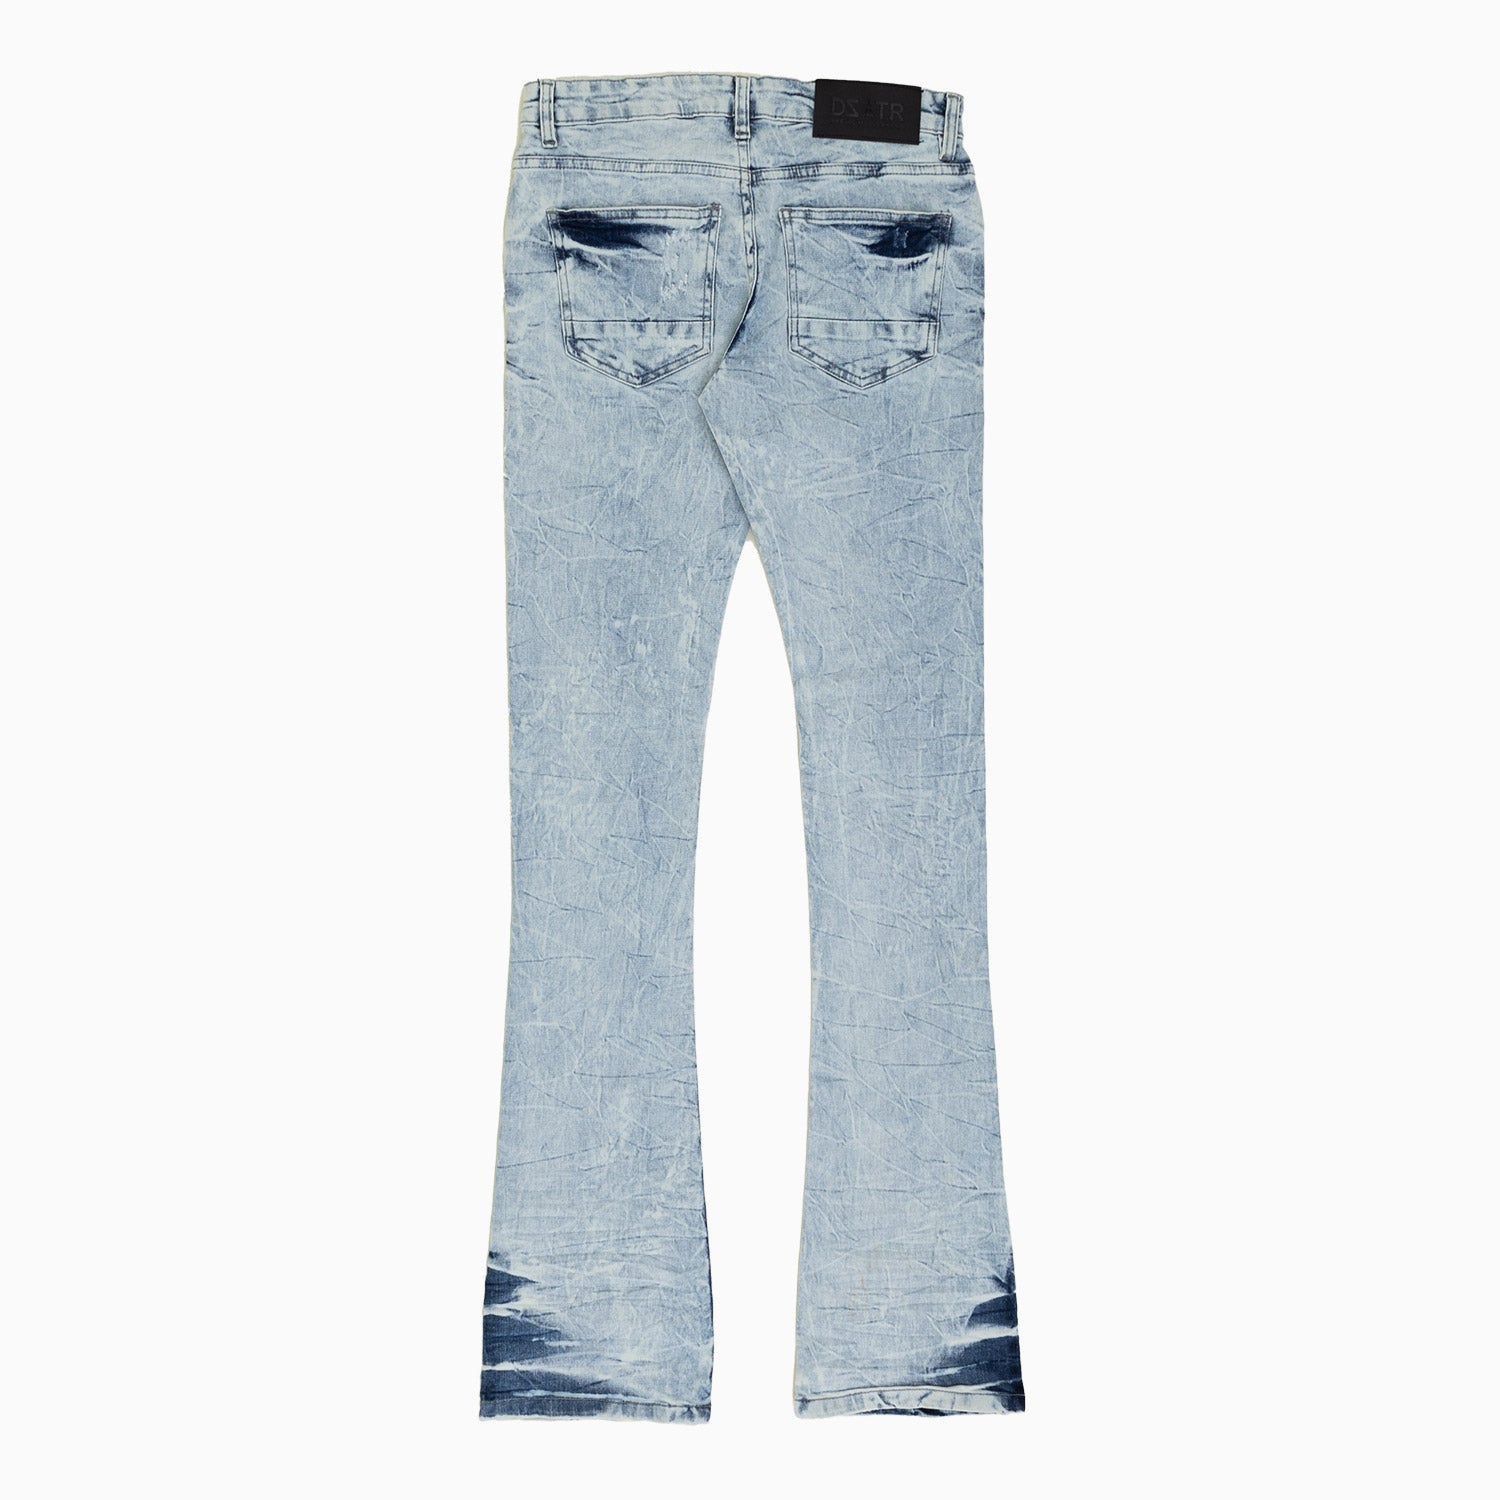 premium-disaster-mens-stacked-skinny-jeans-pant-pd-t-034